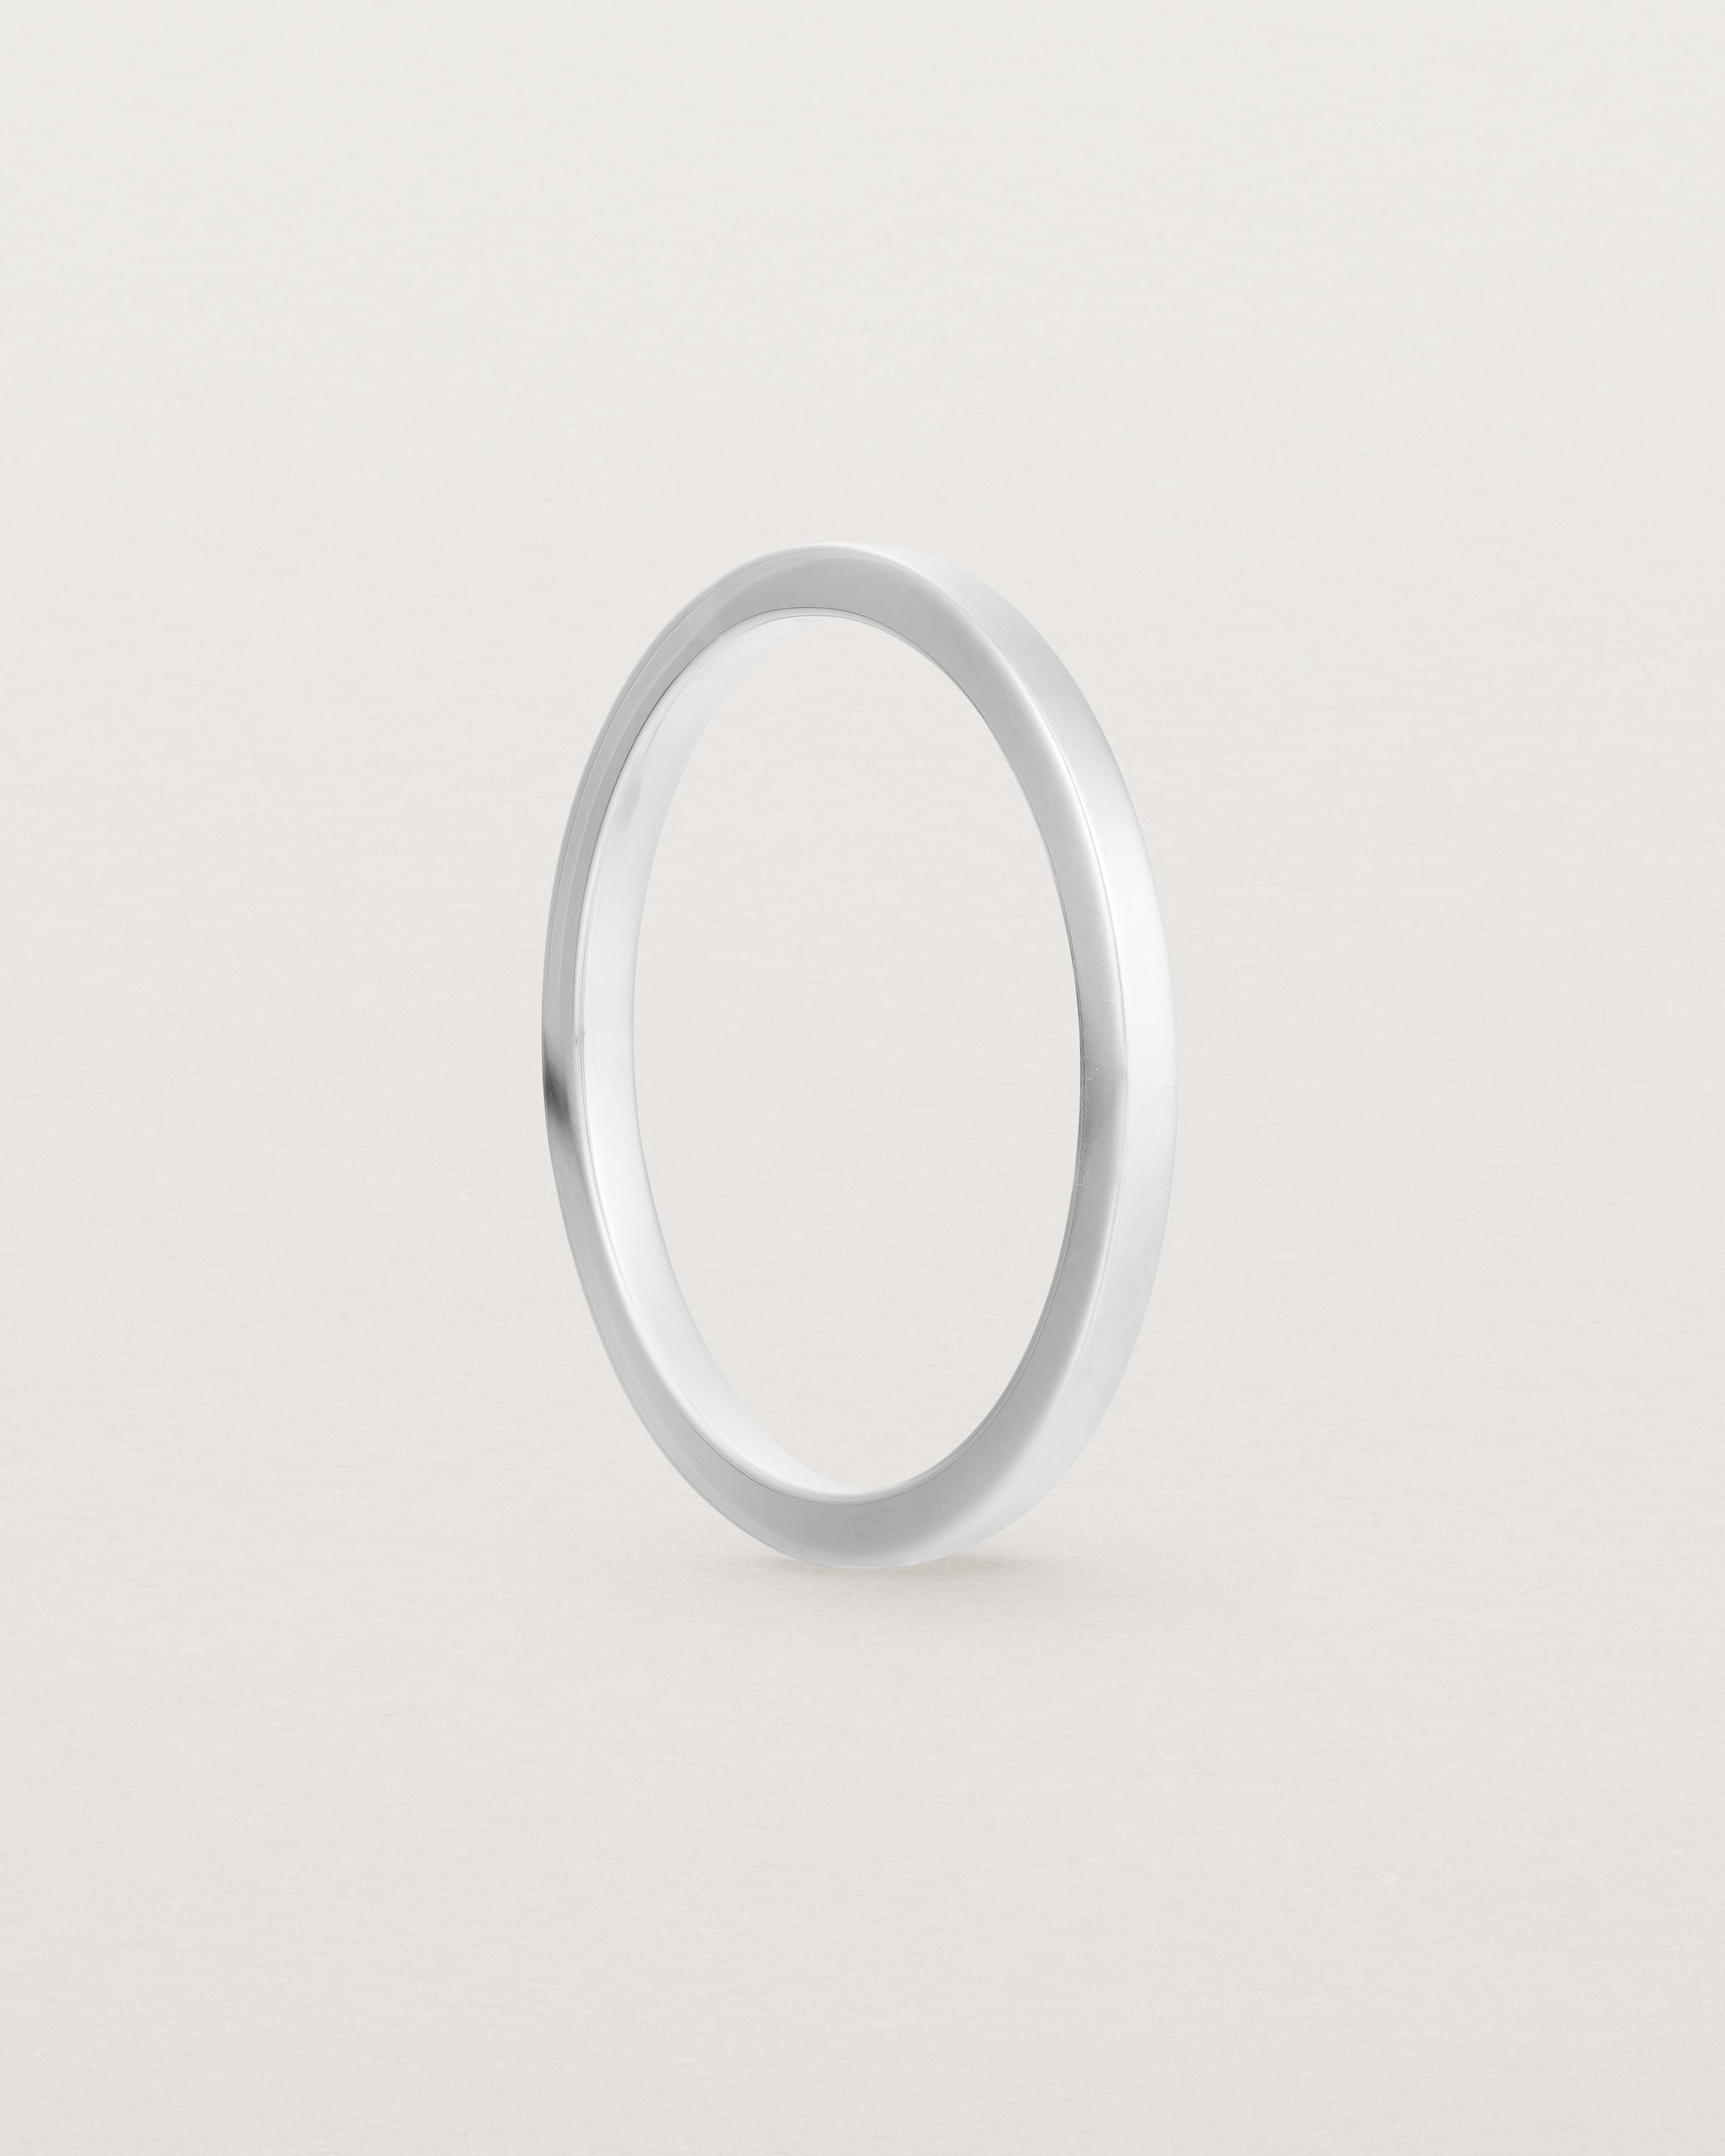 Our 1.5mm square wedding band in white gold